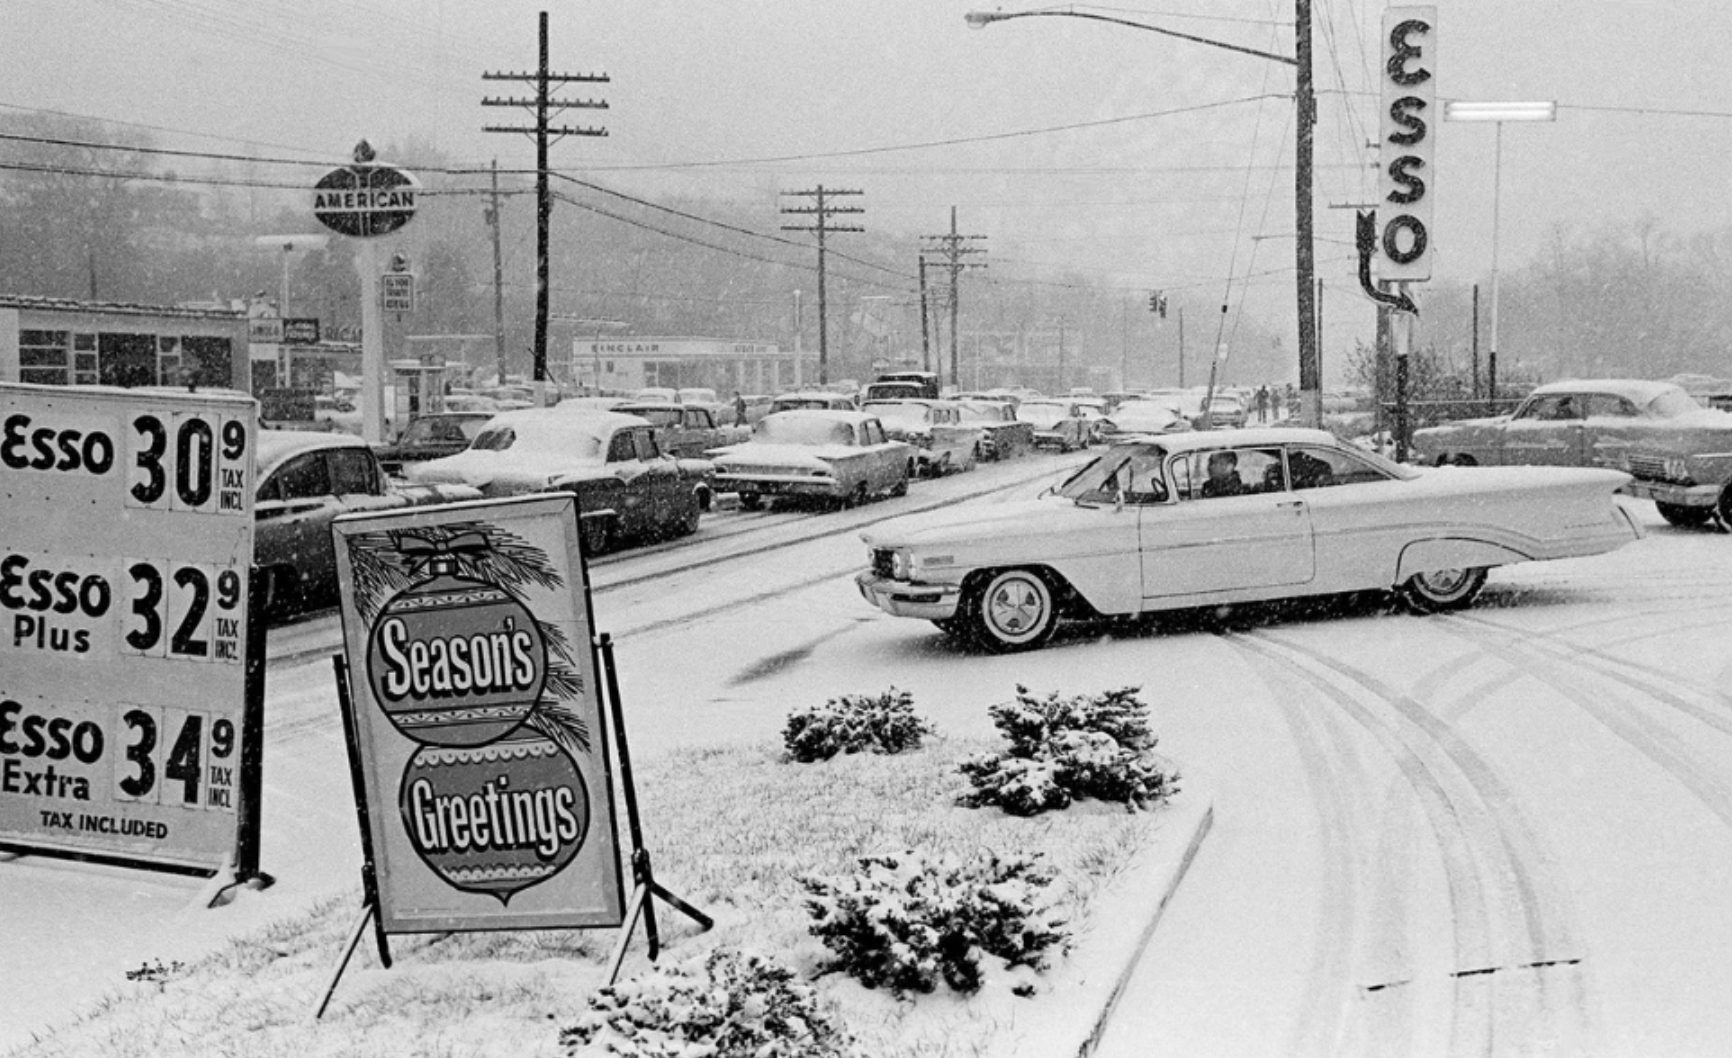 gas prices in 1960 - Esso 30% Esso 32 Plus Esso 34 Extra Tax Included Tax Day Seasons Greetings S S